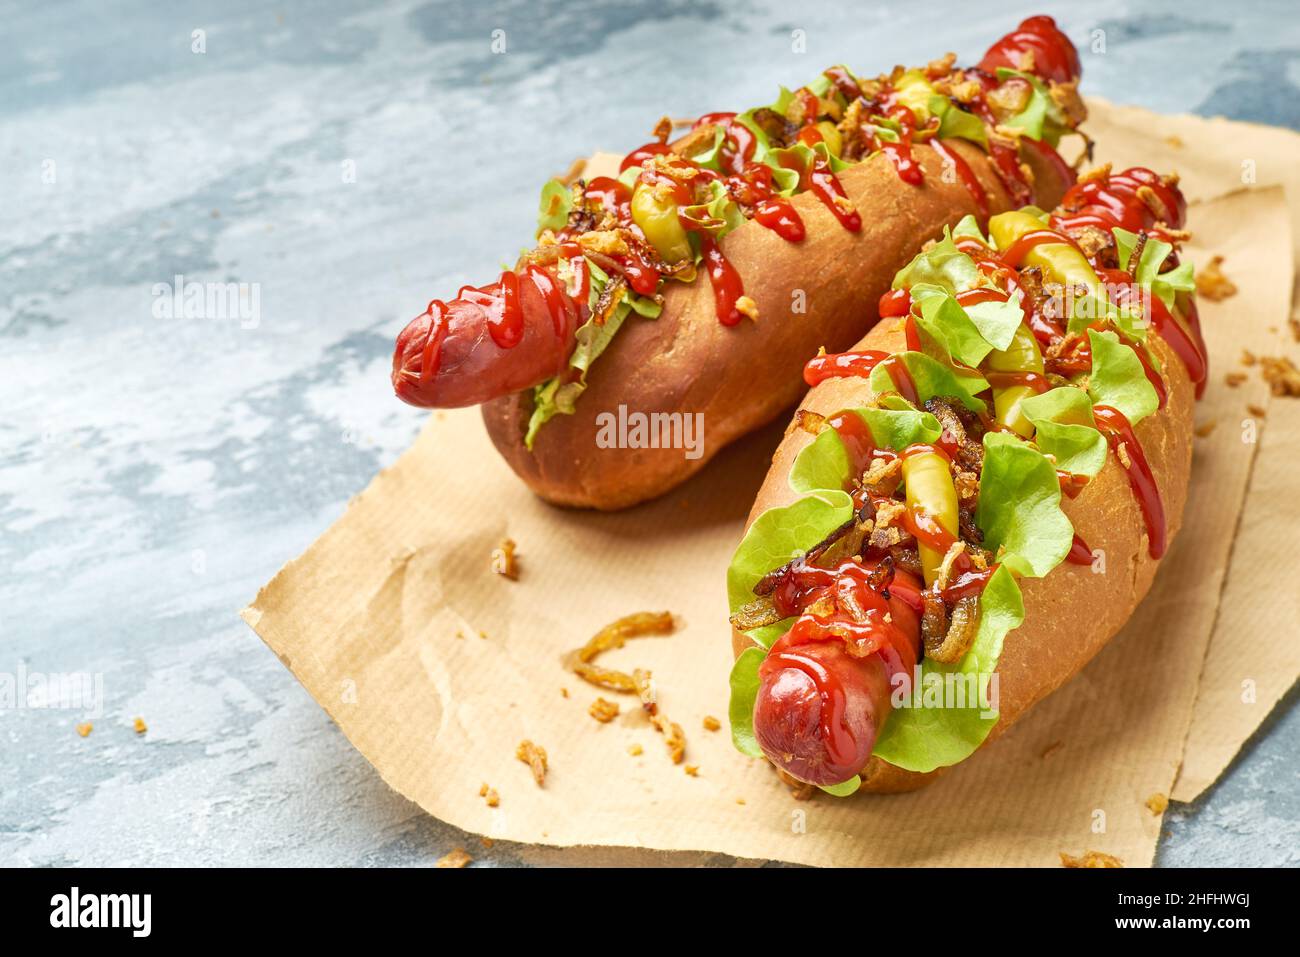 Two delicious hotdogs on craft paper over concrete background Stock Photo